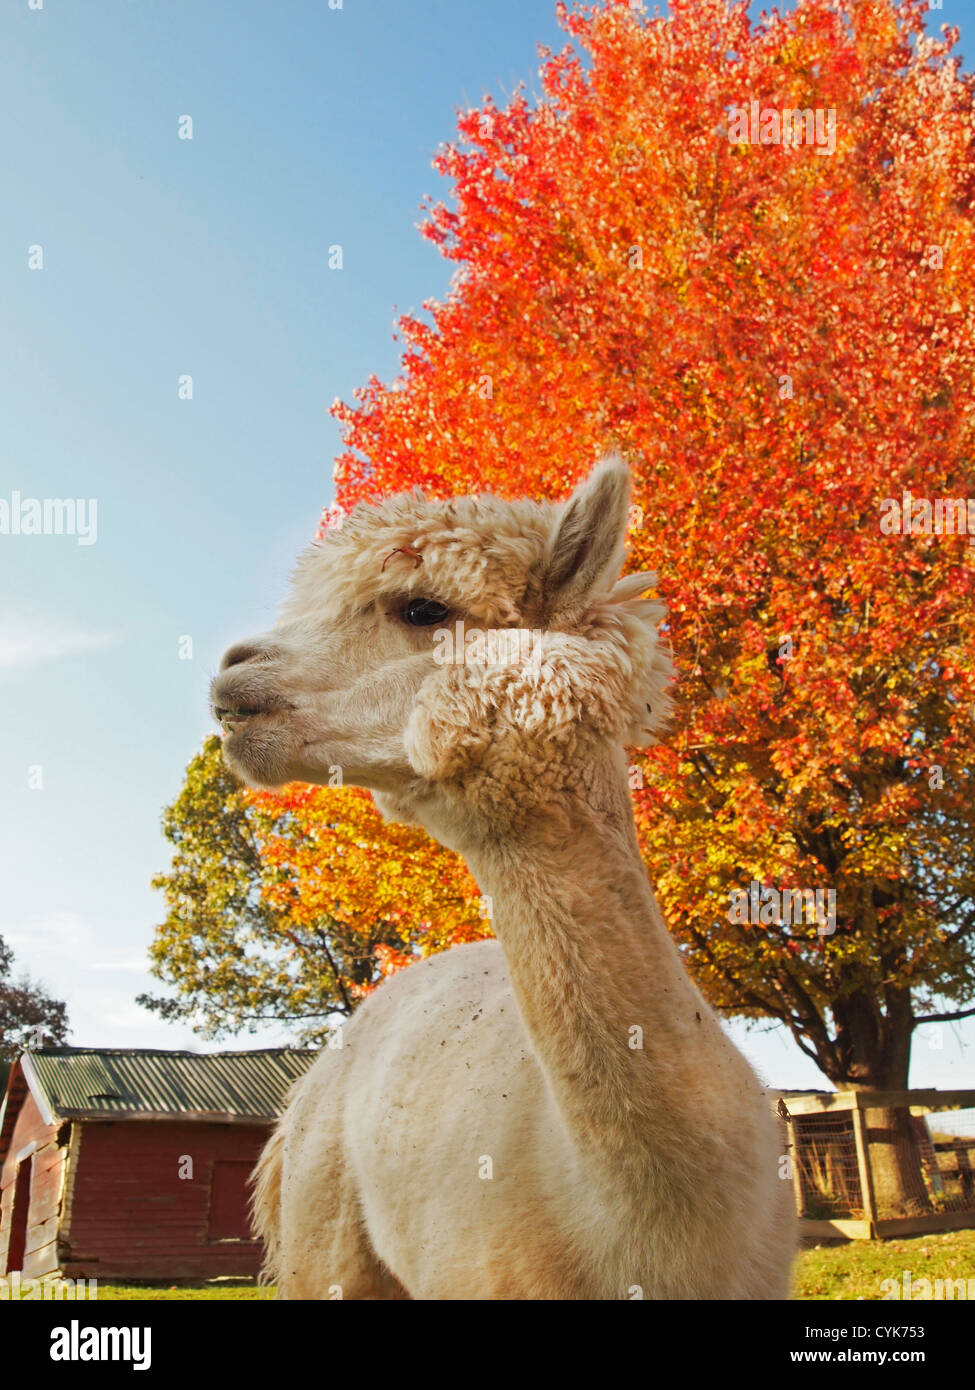 A white alpaca gazes off thoughtfully in front a vibrant orange tree and a small red barn, on a farm in the autumn. Stock Photo